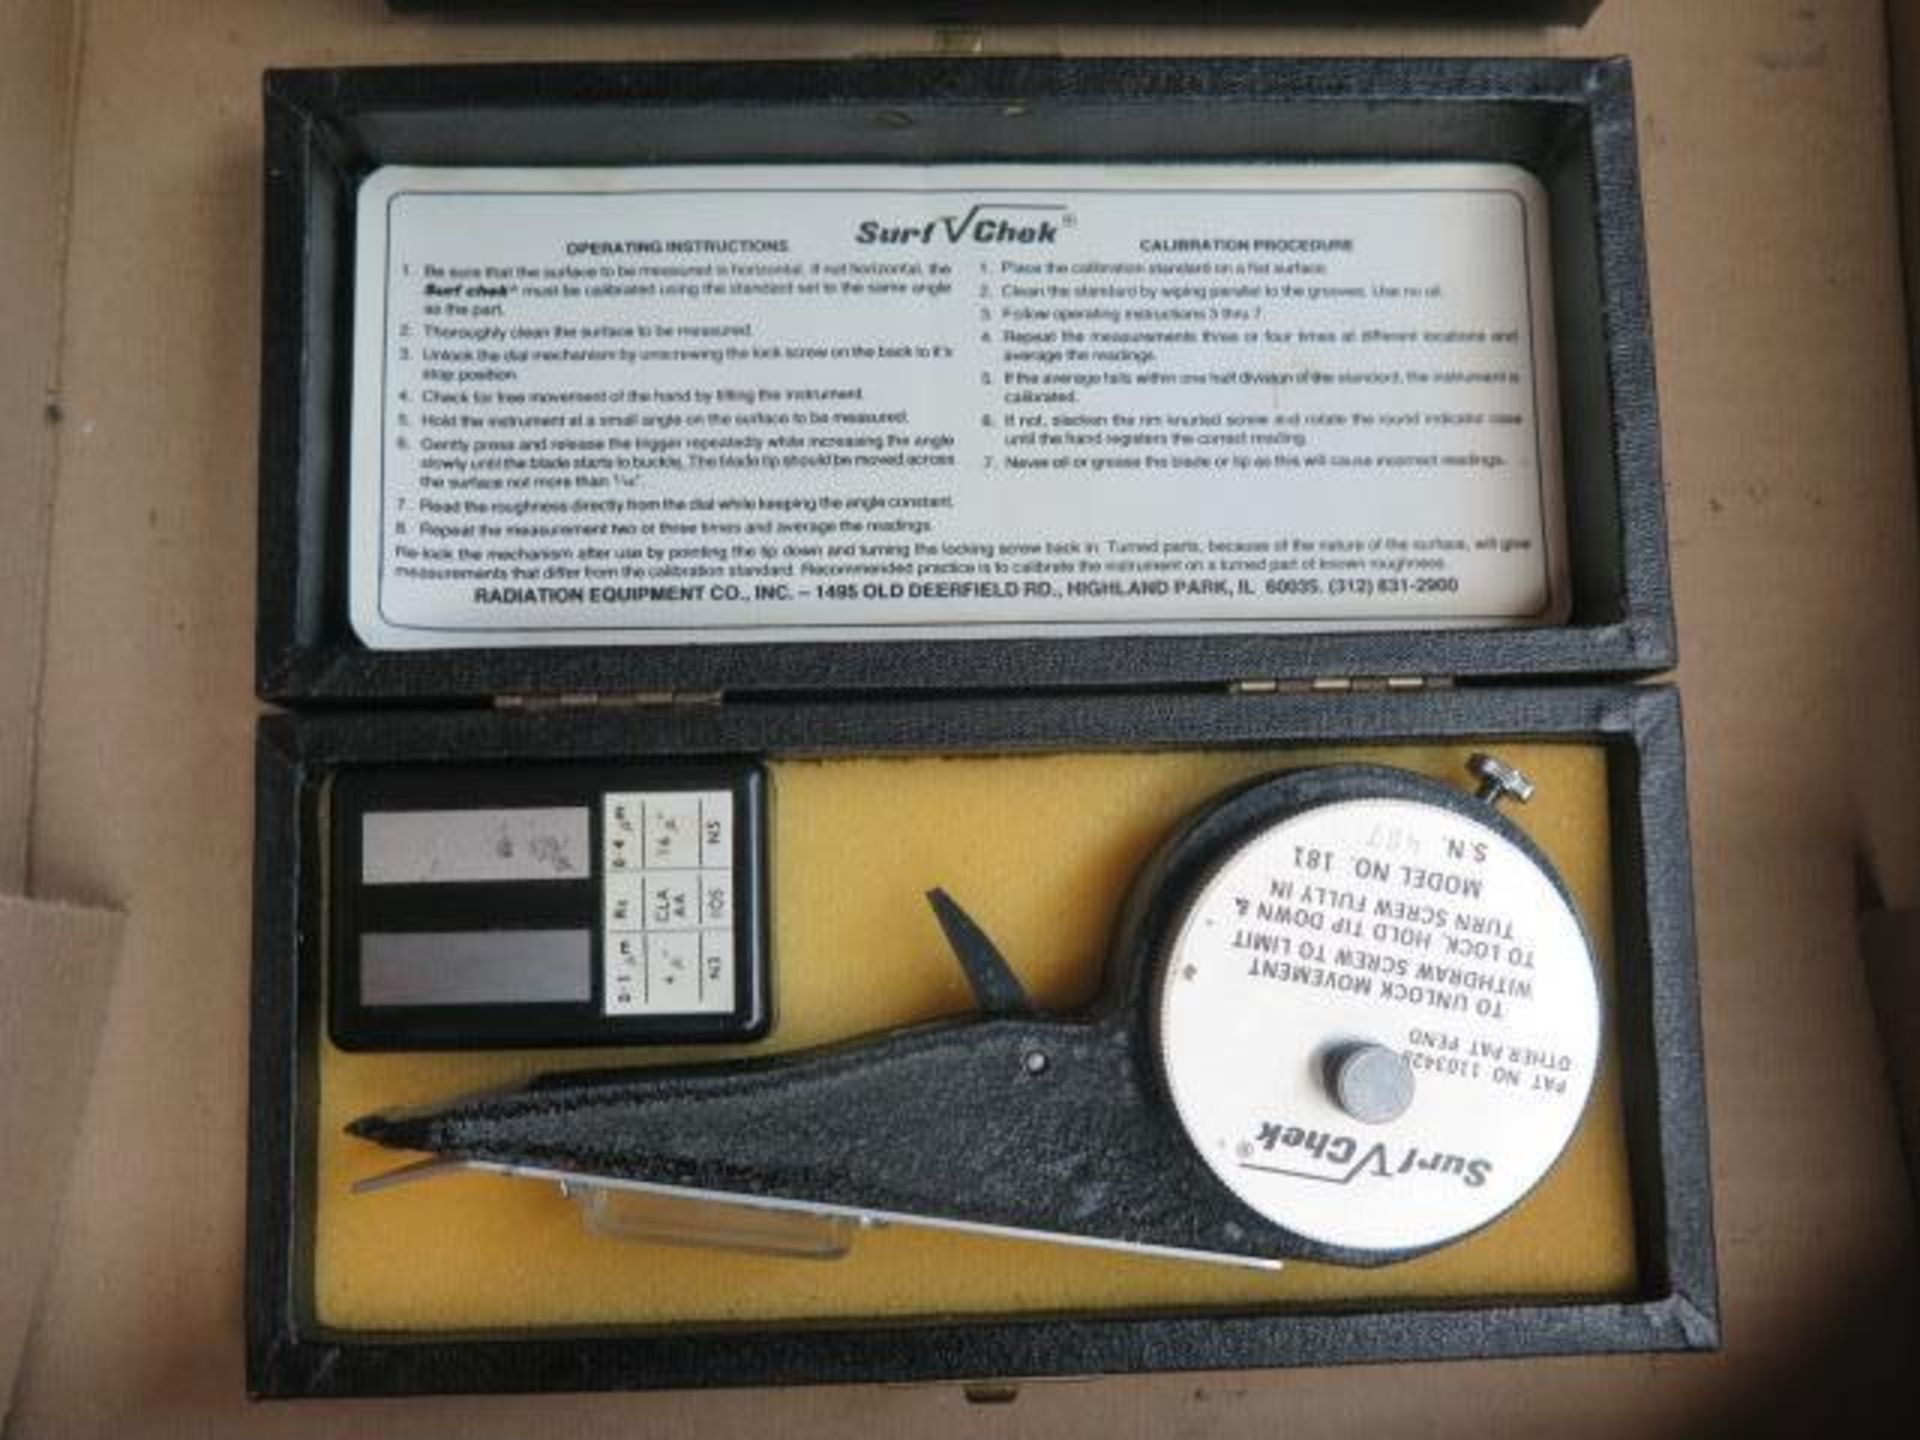 Herman Sticht RPM Meter and Surf-Check Surface Roughness Gage (SOLD AS-IS - NO WARRANTY) - Image 4 of 4